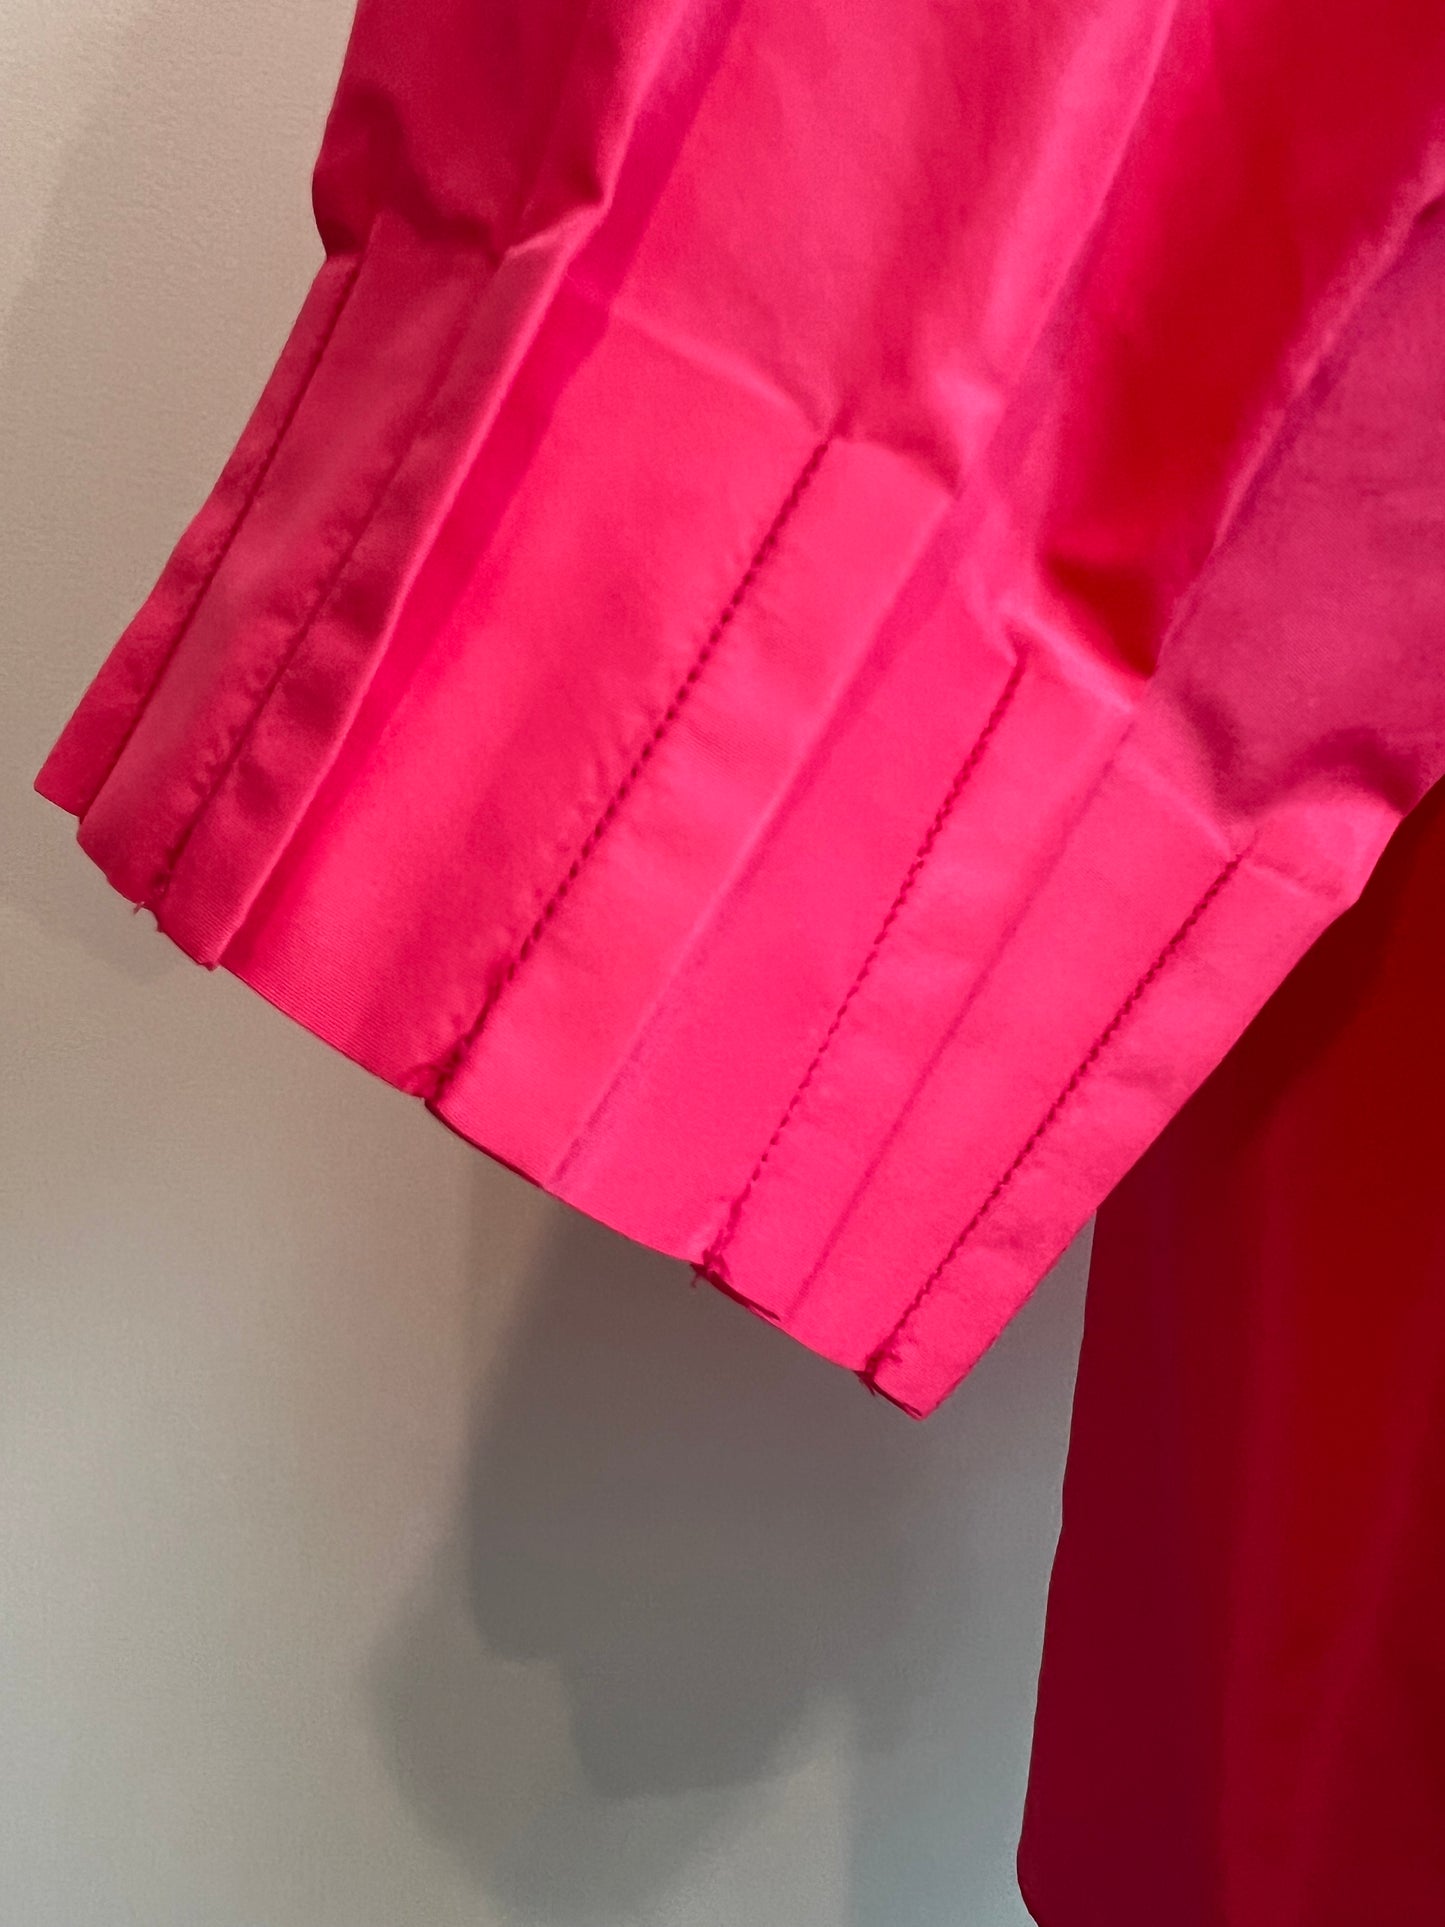 Le Sarte Pettegole - Wide Pleated Sleeved Blouse in Neon Pink